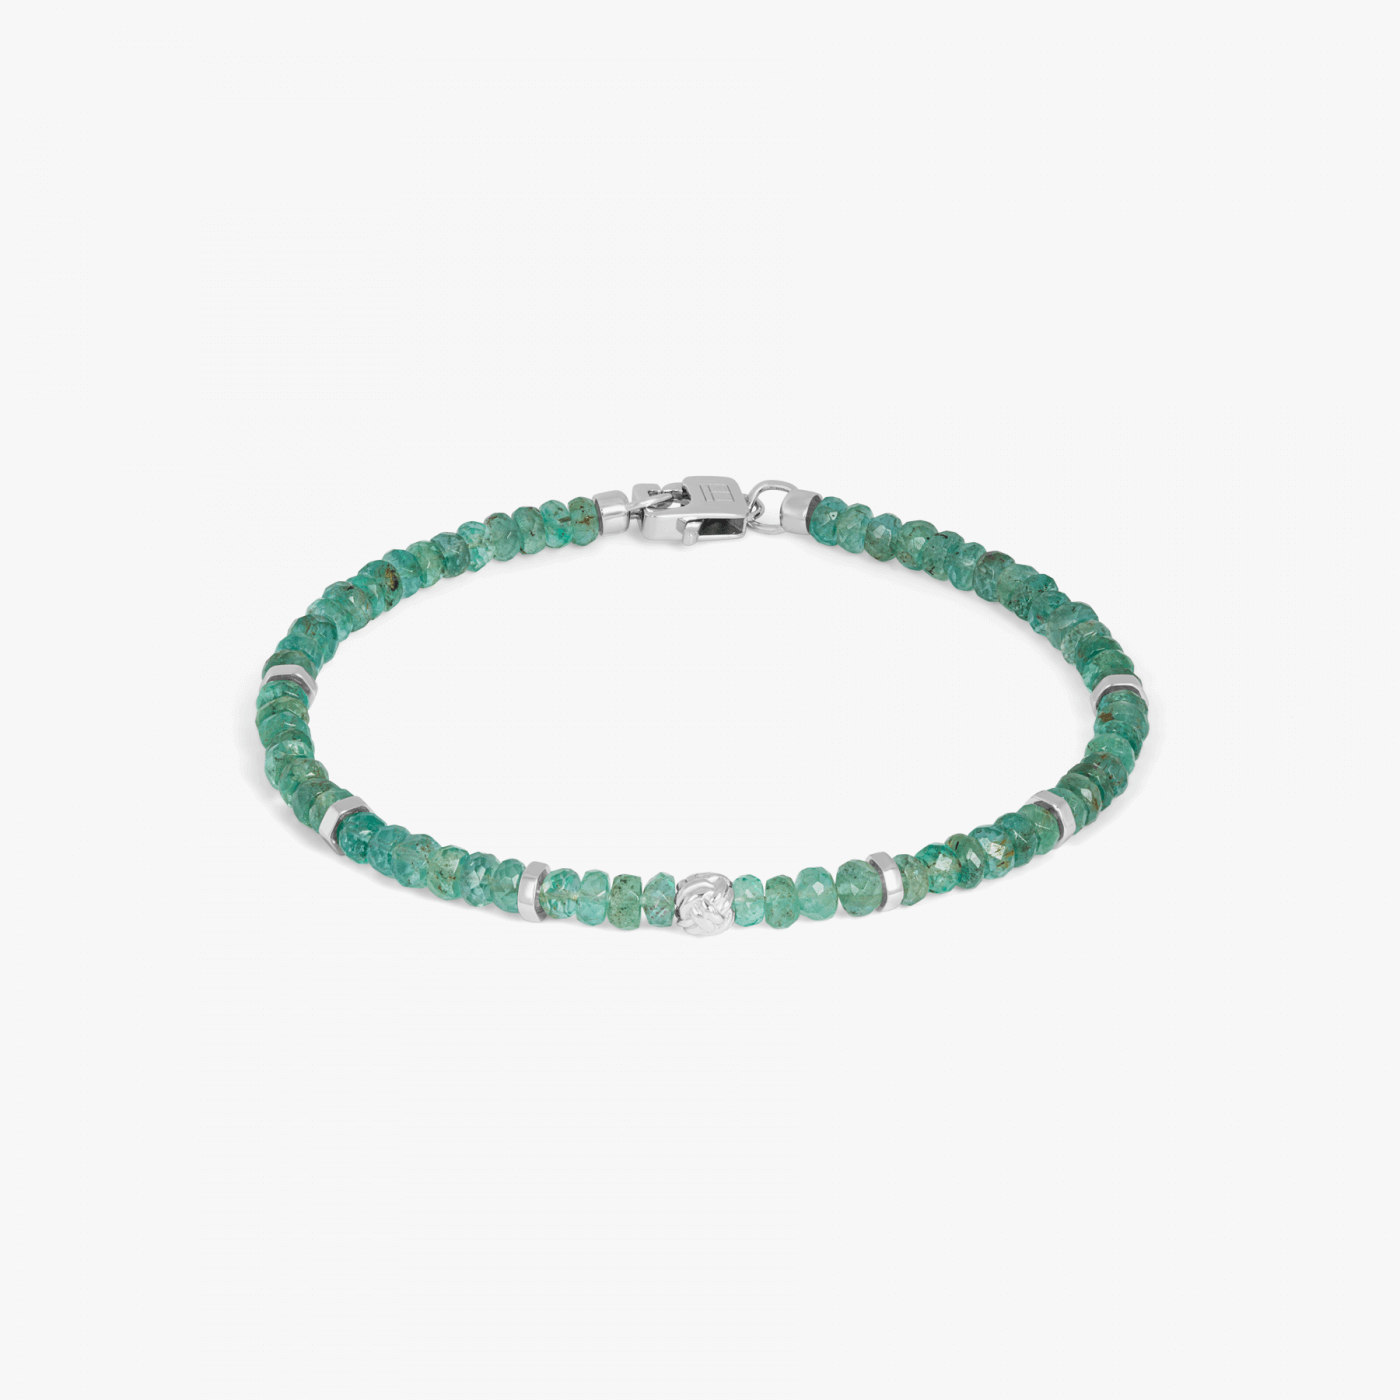 Nodo bracelet with emerald and sterling silver